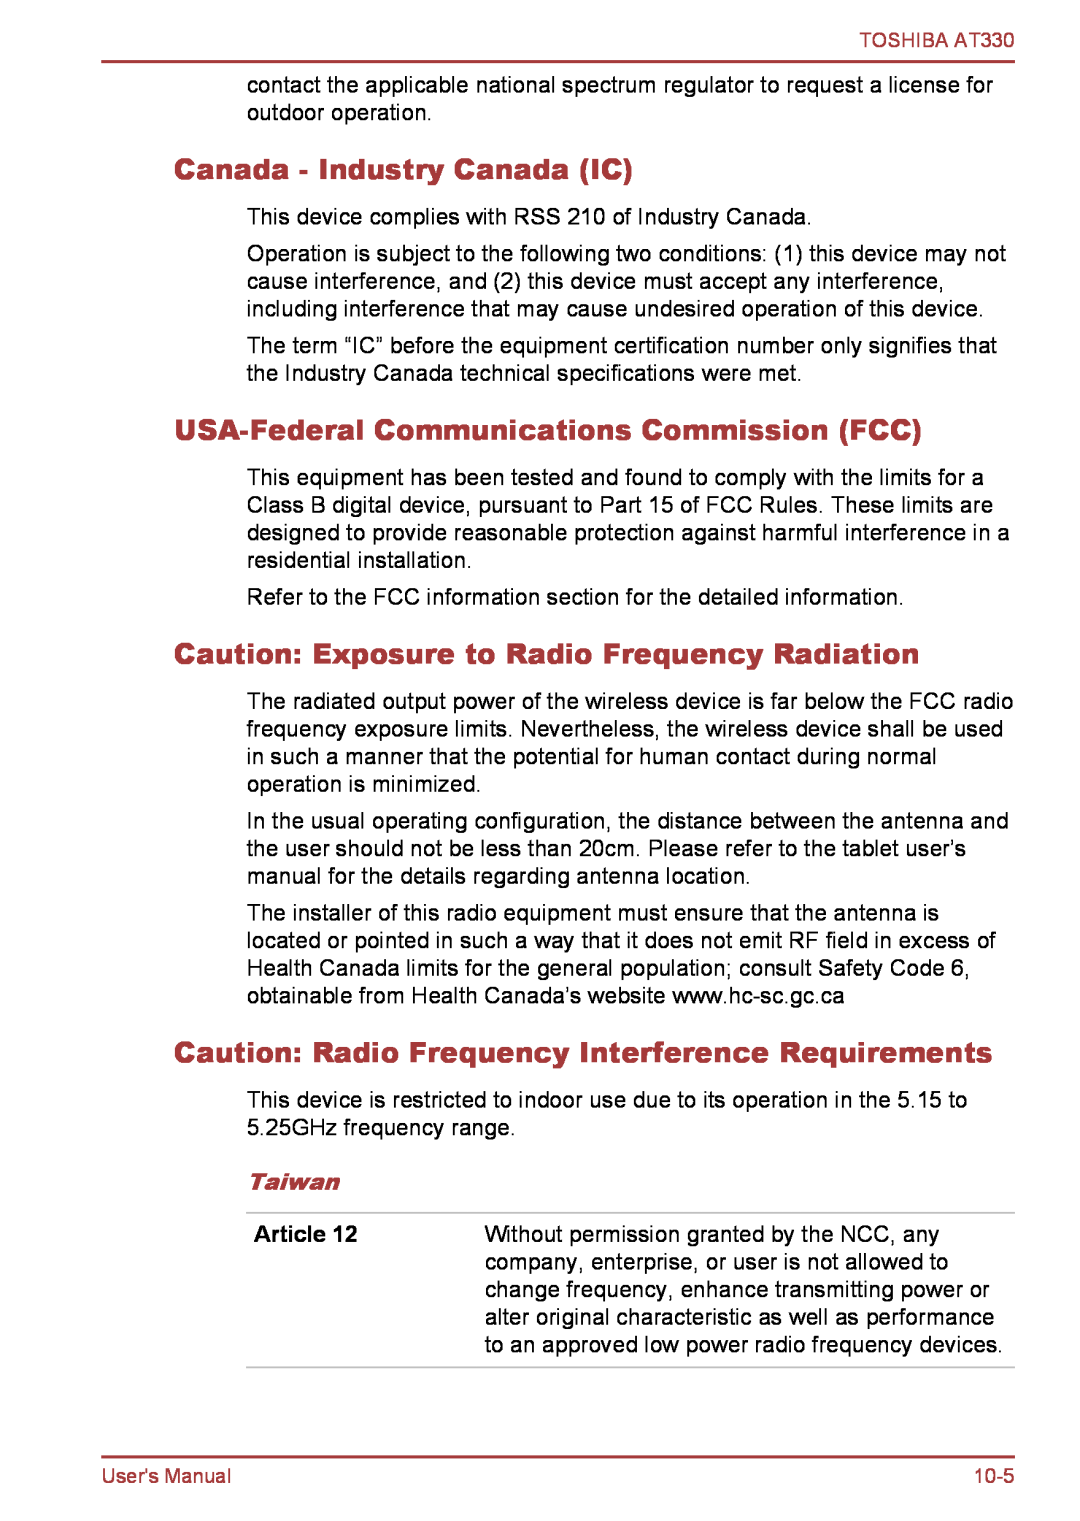 Toshiba at330 user manual Canada - Industry Canada IC, USA-Federal Communications Commission FCC, Taiwan, Article 